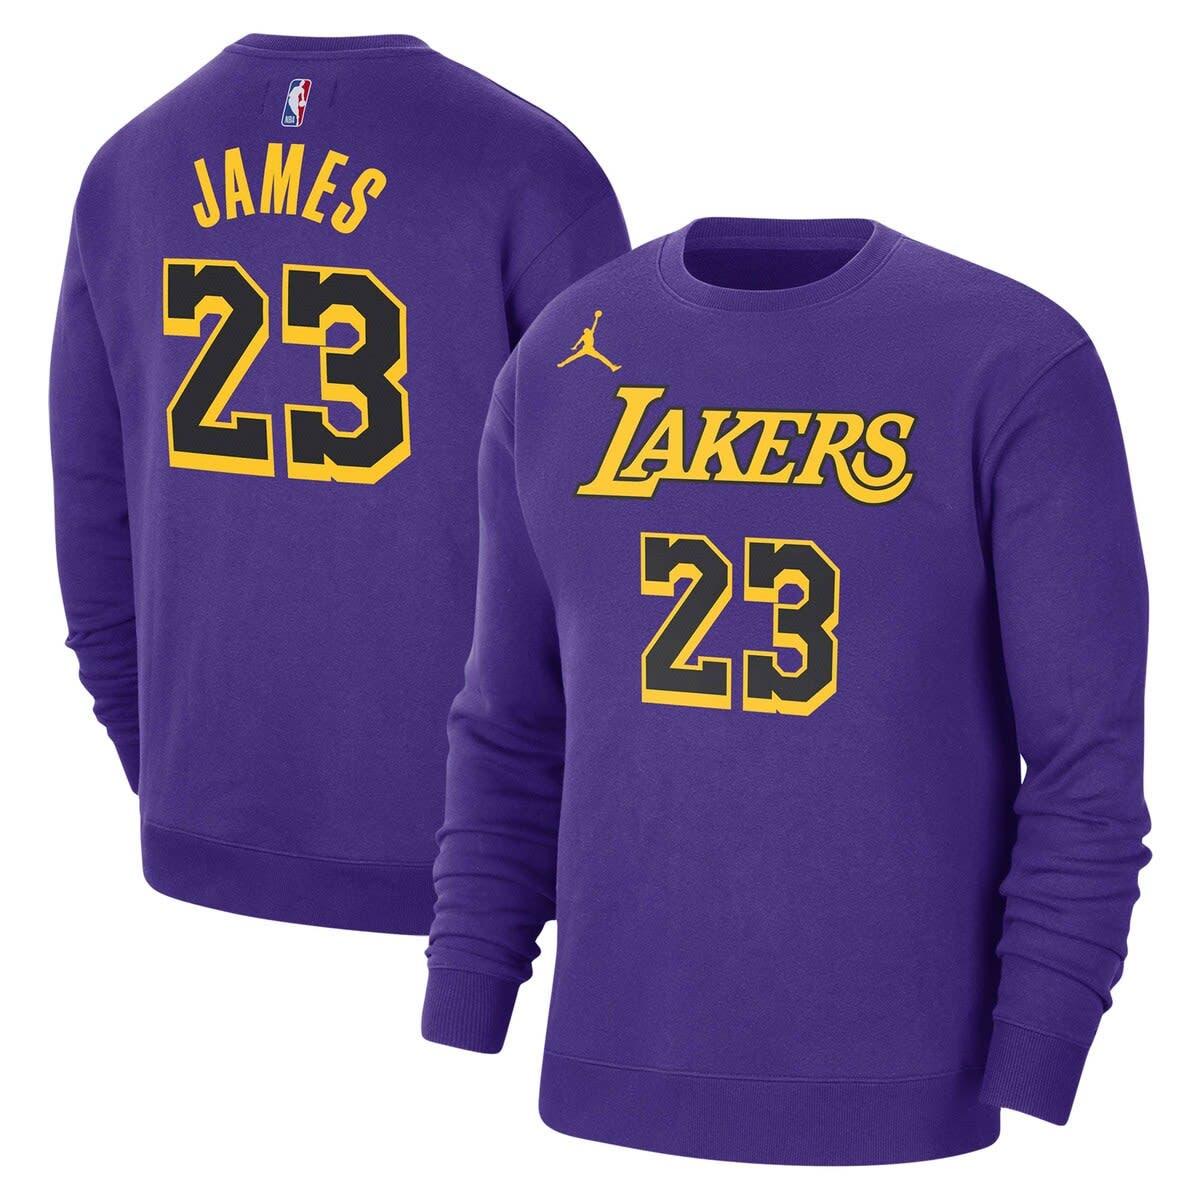 LeBron James Nike Embroidered Shirt, Los Angeles Lakers